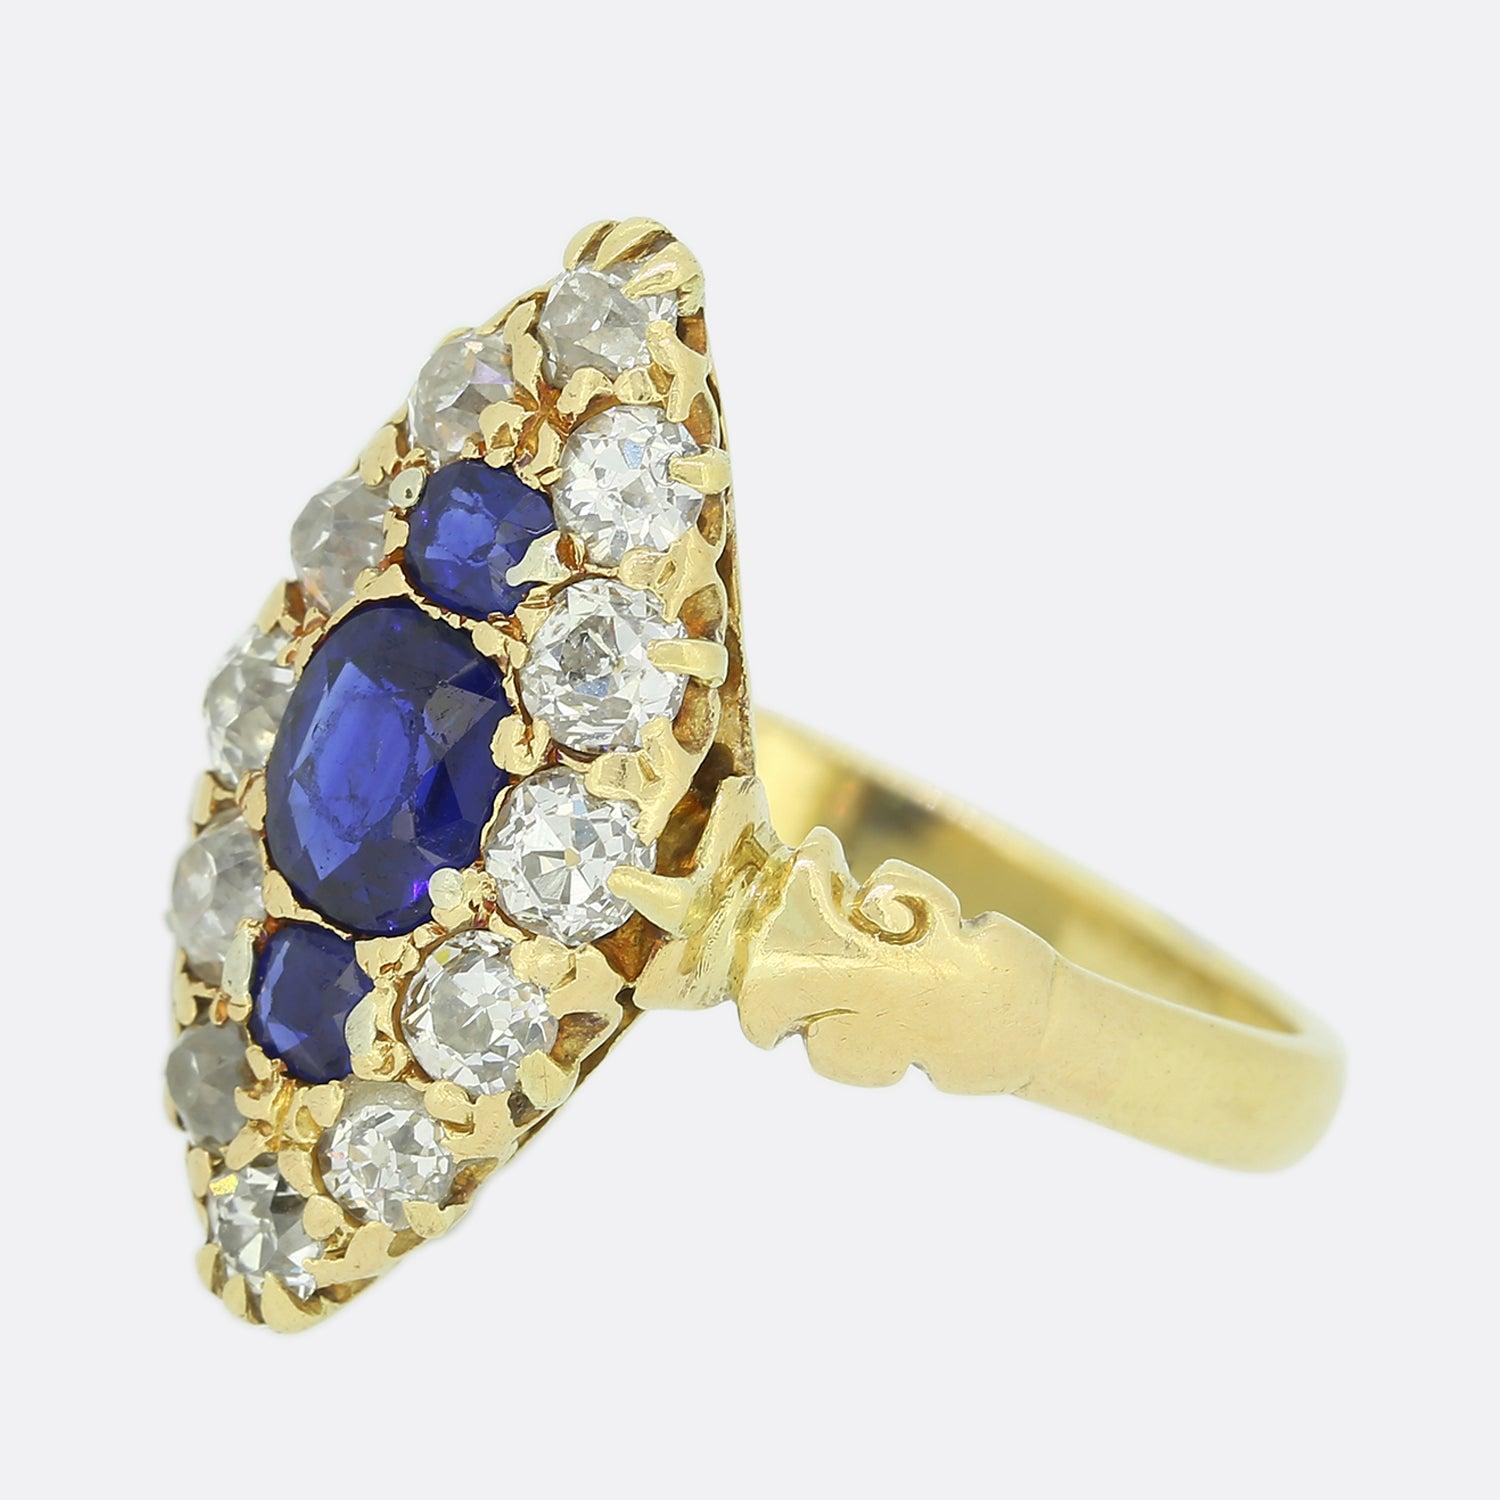 This is an exceptional antique navette ring. Crafted in 18ct yellow gold, the ring boasts a centralised oval shaped sapphire with a single neighbouring round sapphire sitting atop and below. The surrounding old cuts diamonds create a gorgeous